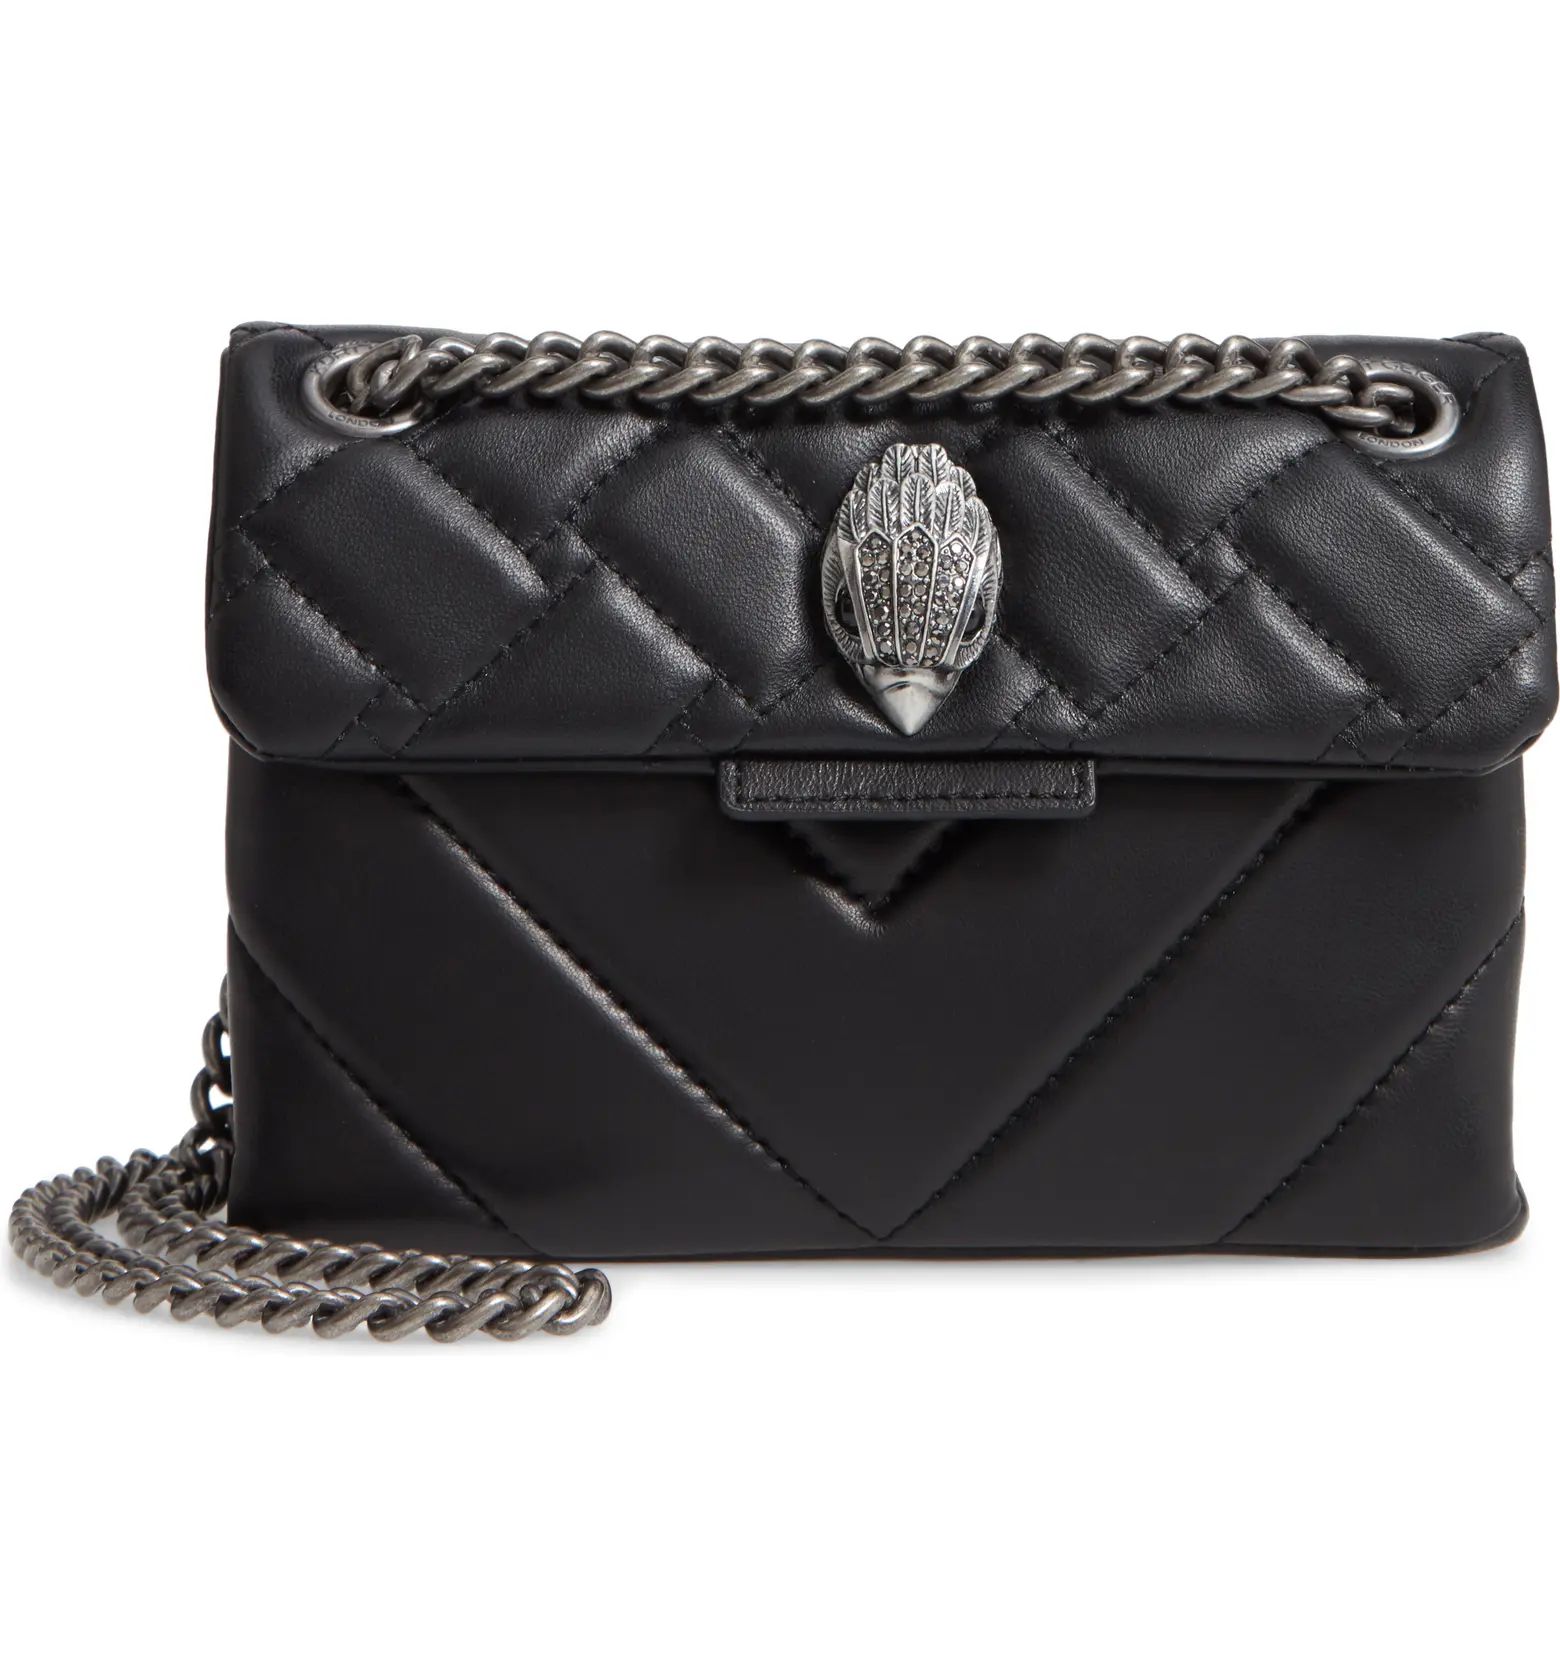 Mini Kensington Quilted Leather Crossbody Bag | Nordstrom